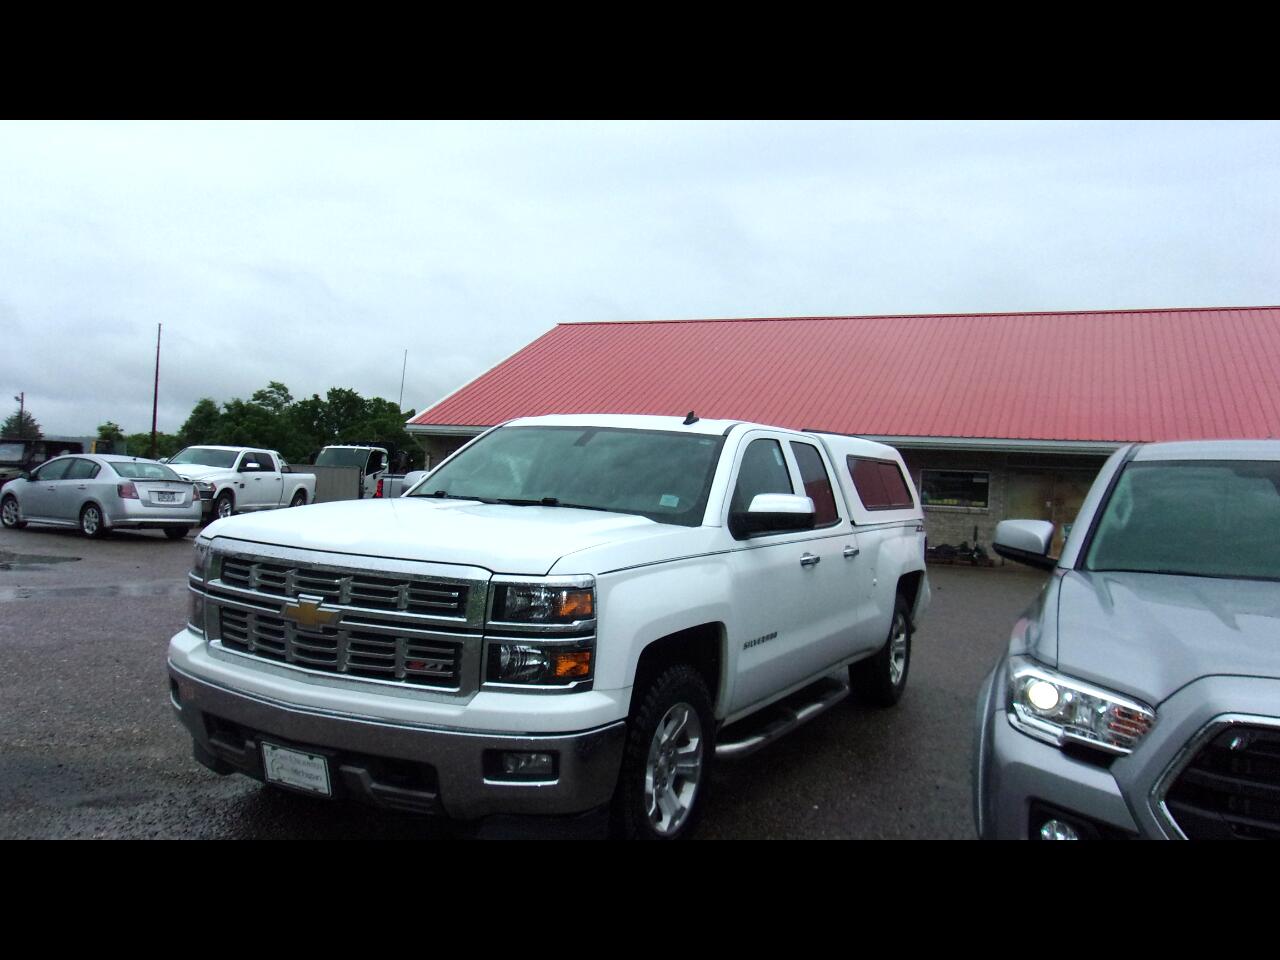 Used 14 Chevrolet Silverado 1500 4wd Double Cab 143 5 Lt W 2lt For Sale In W Portsmouth Oh 239 Auto Group Inc